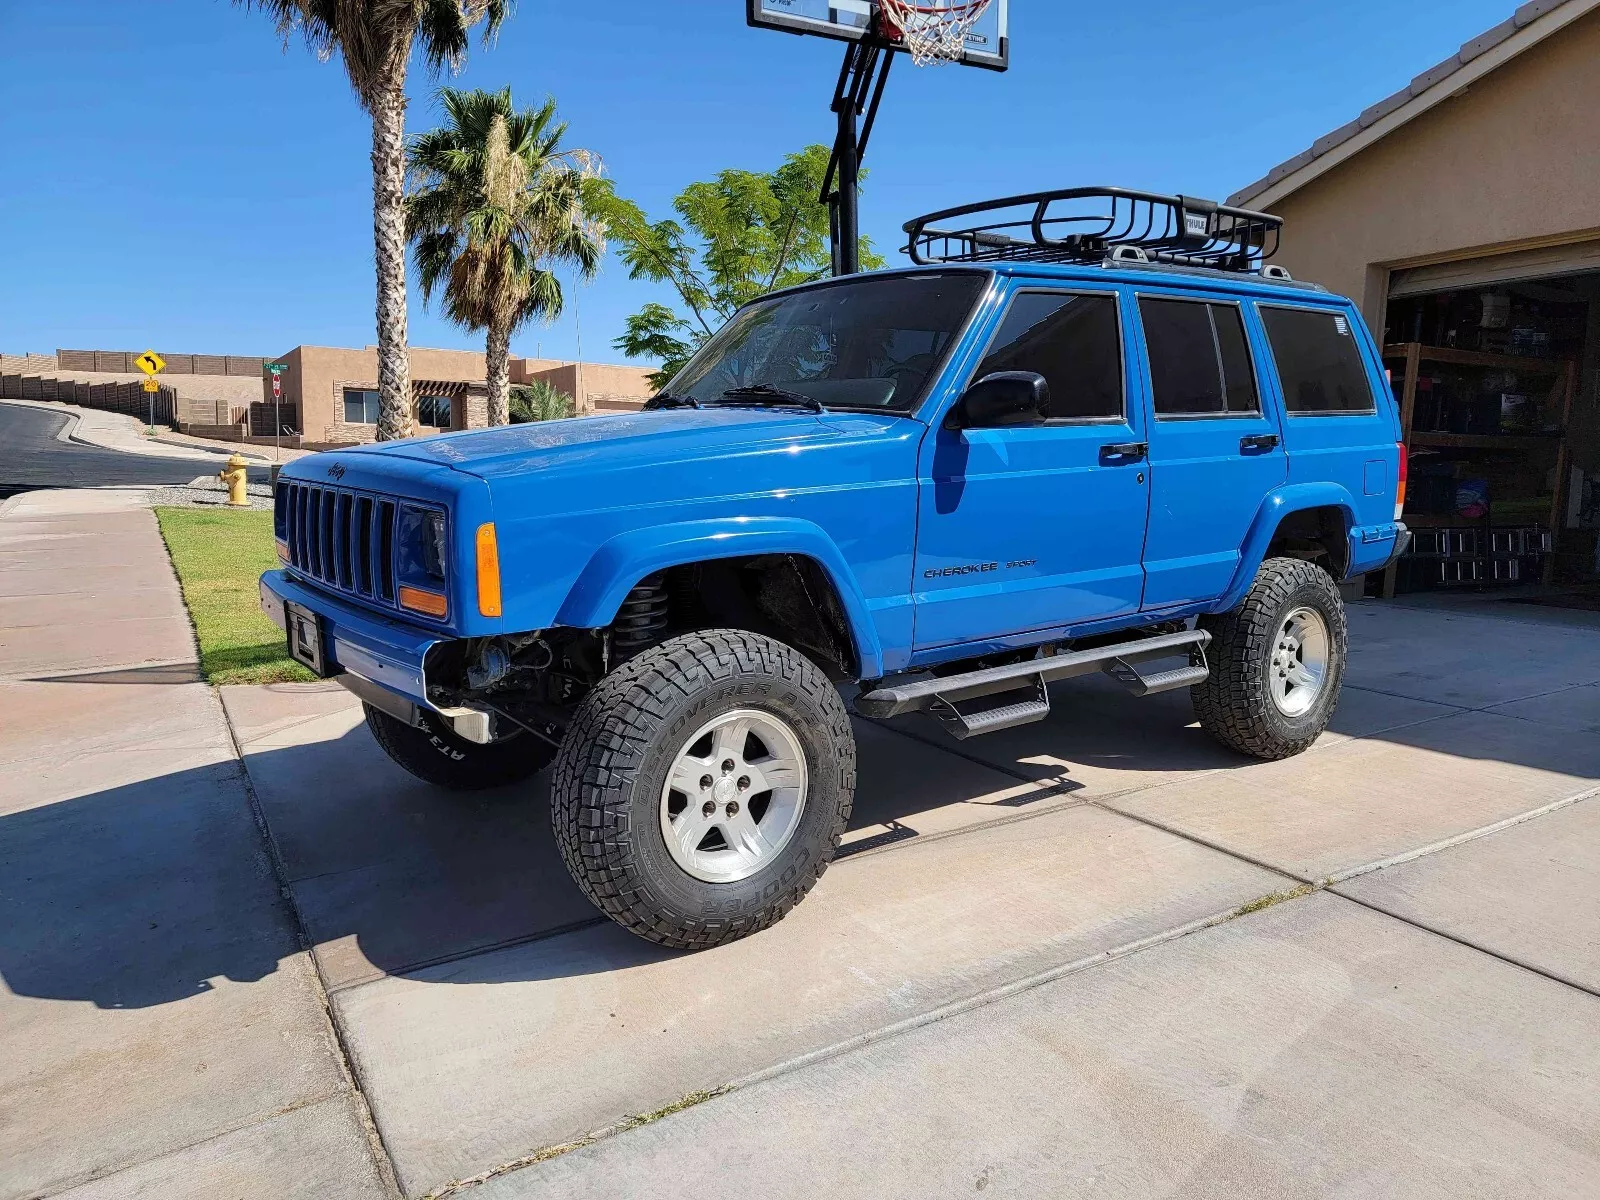 1999 Jeep Cherokee Sport for sale